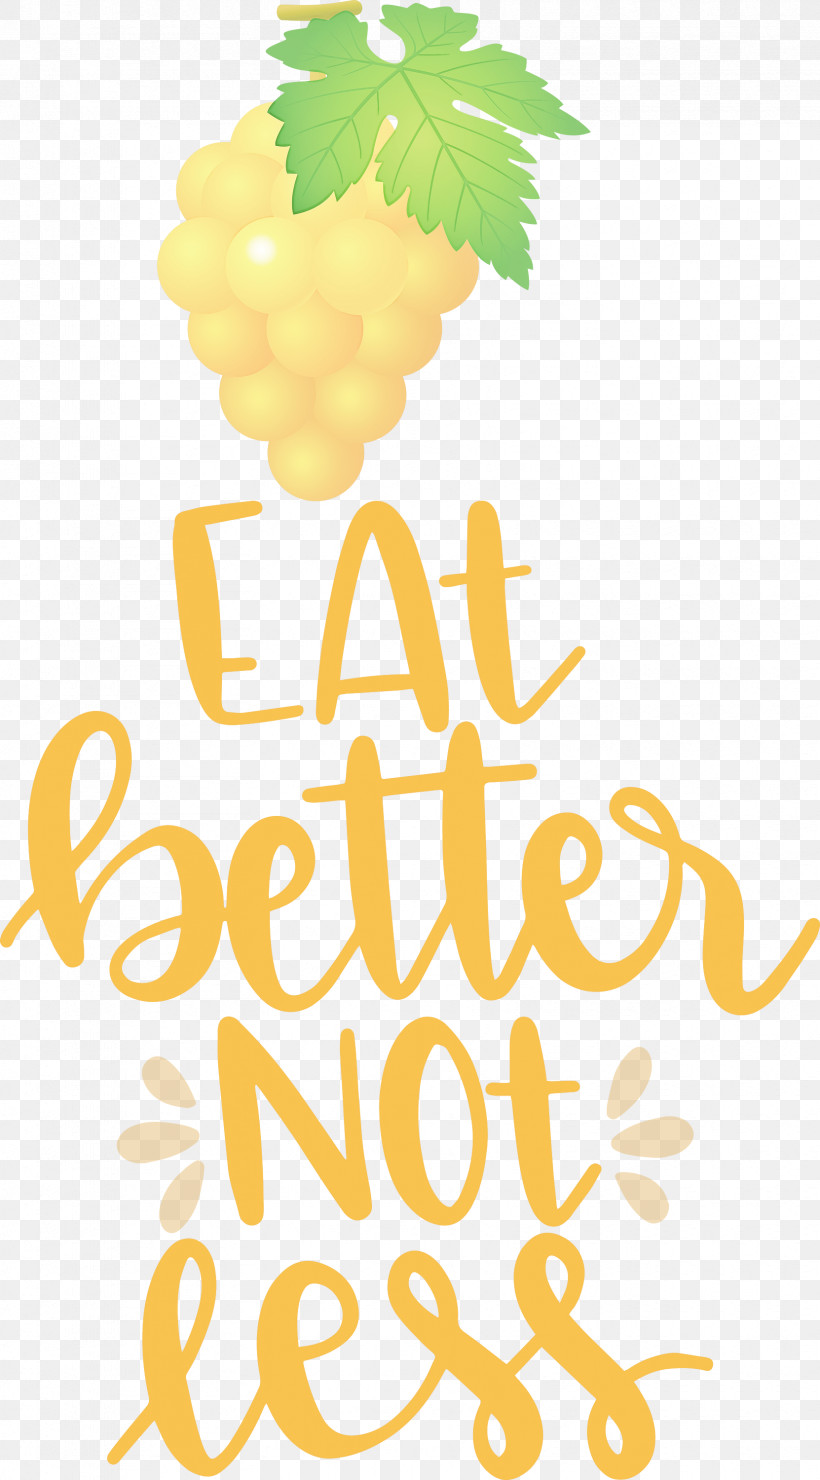 Eat Better Not Less Food Kitchen, PNG, 1662x3000px, Food, Floral Design, Fruit, Happiness, Kitchen Download Free